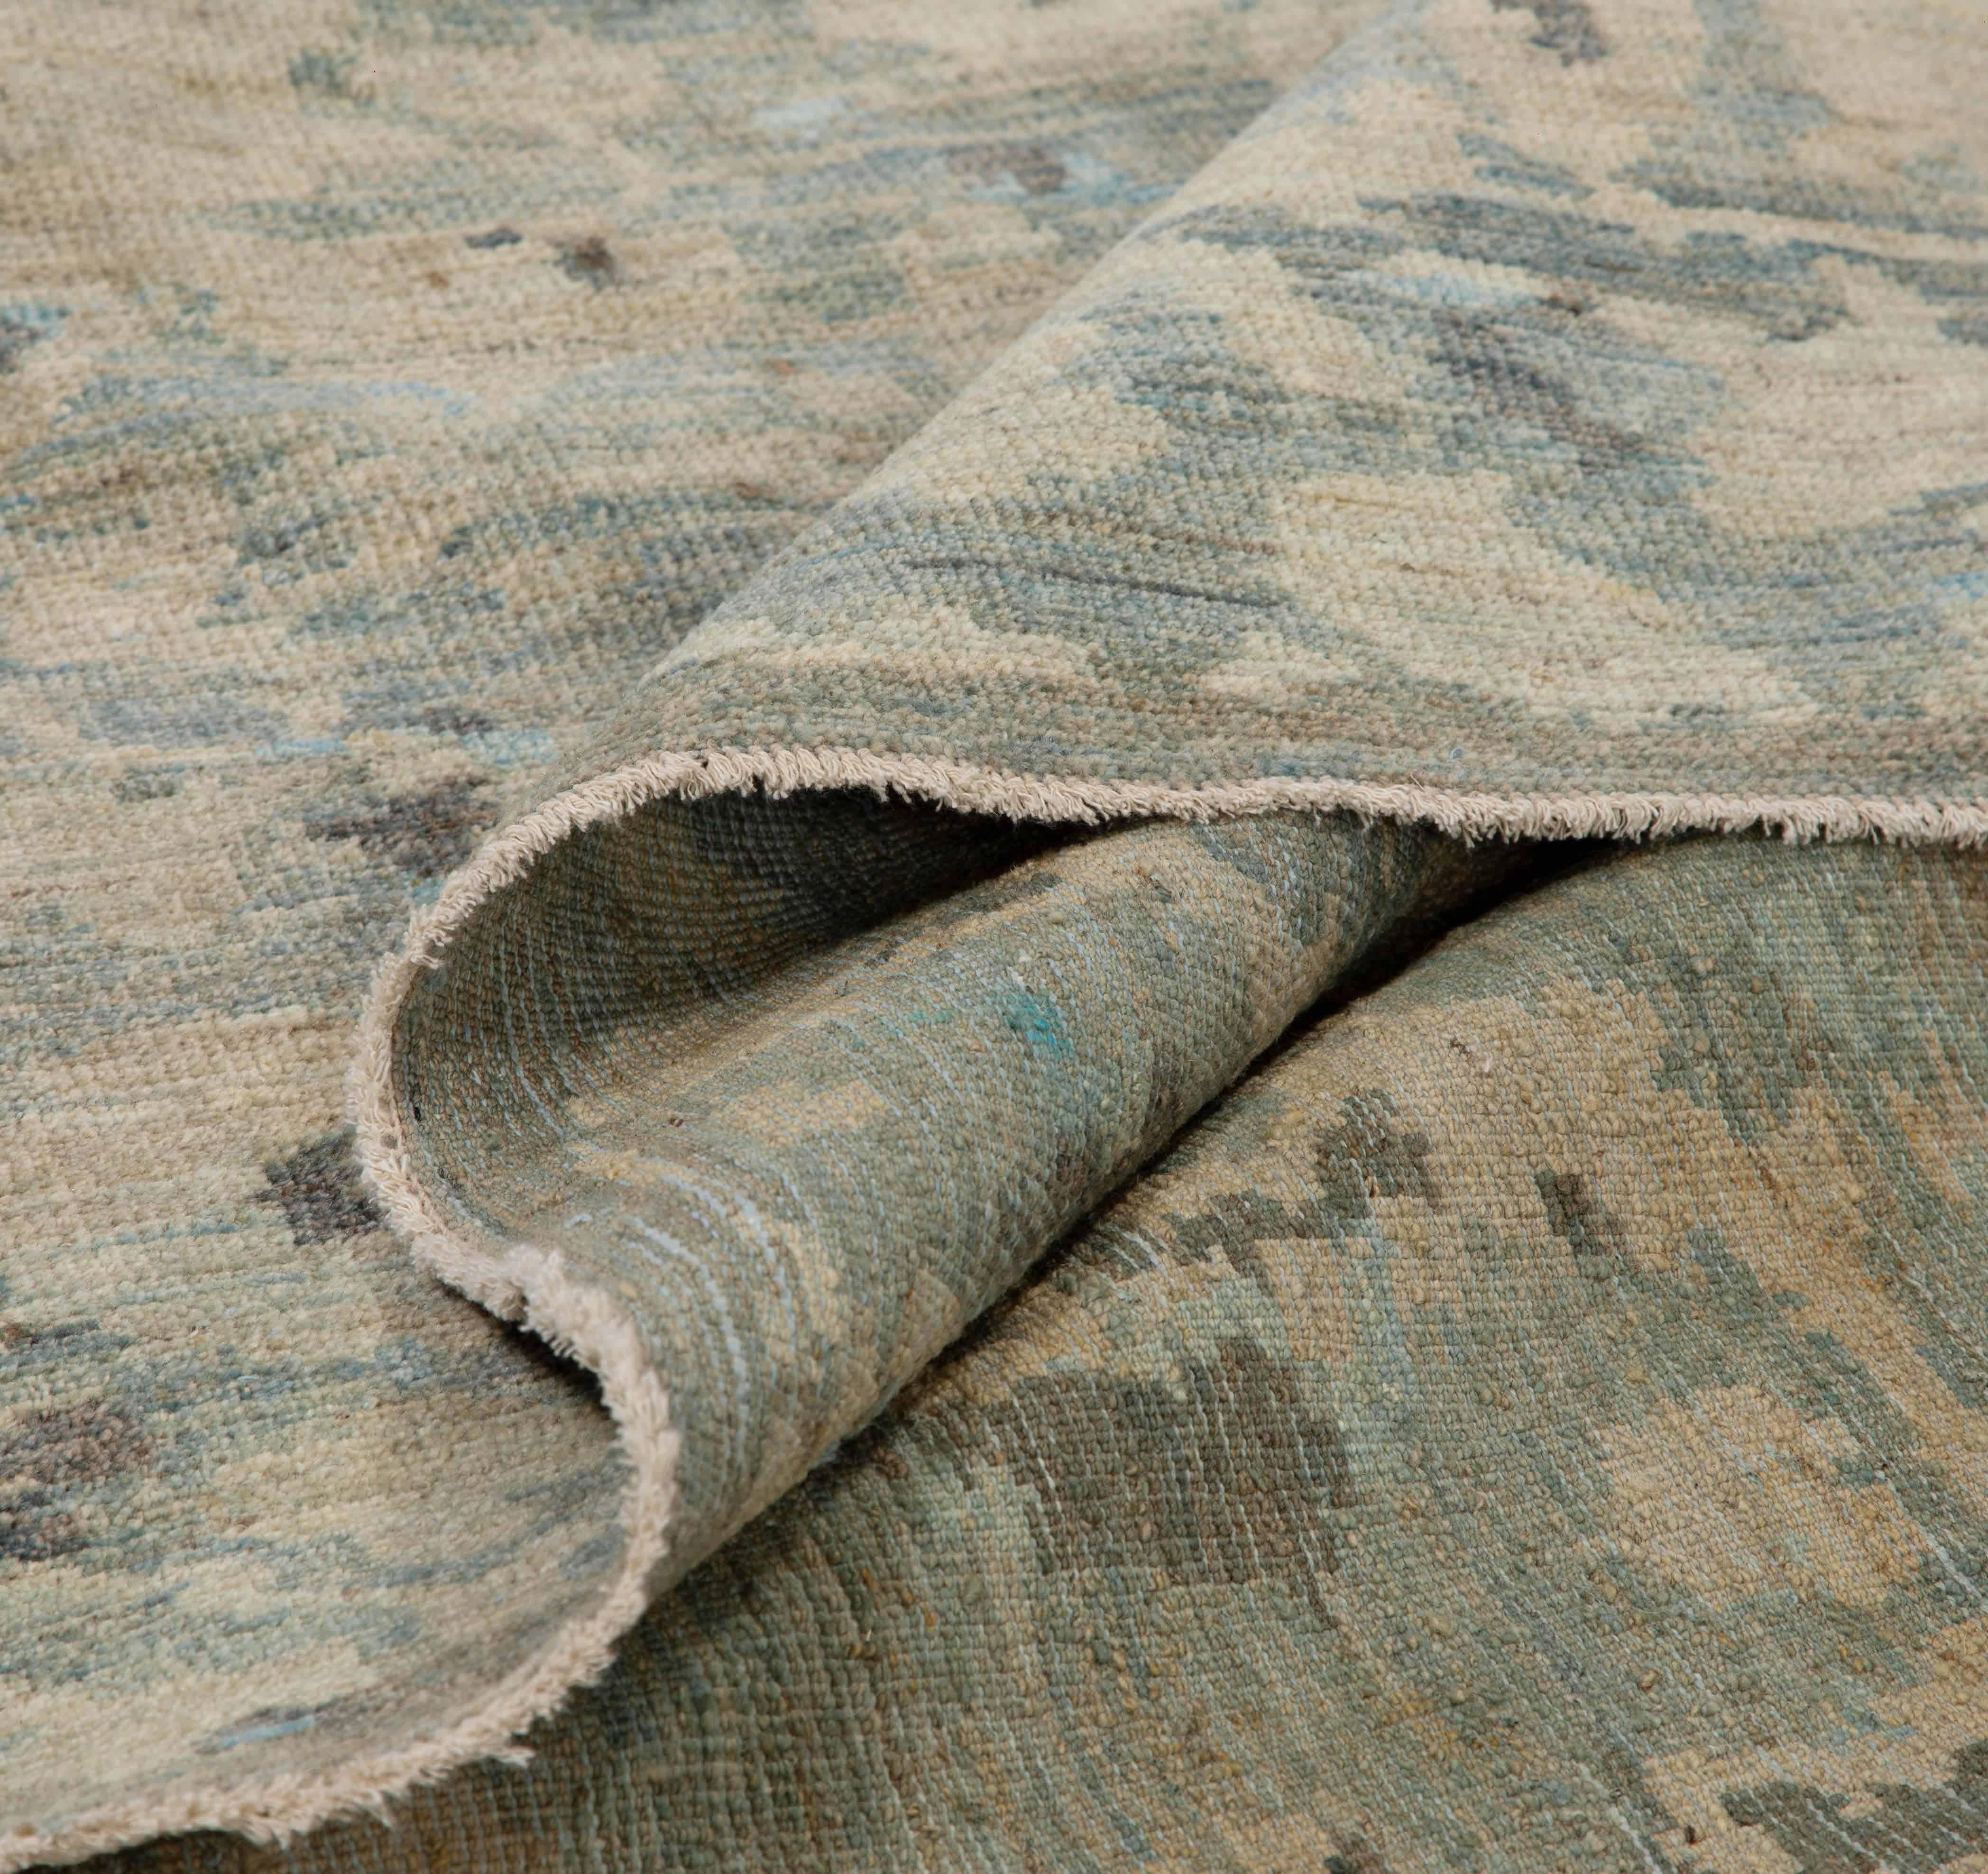 Handmade Turkish area rug from high quality sheep’s wool and colored with eco-friendly vegetable dyes that are proven safe for humans and pets alike. It’s a unique Sultanabad design showcasing a gorgeous mix of blue, beige and gray field of Herati